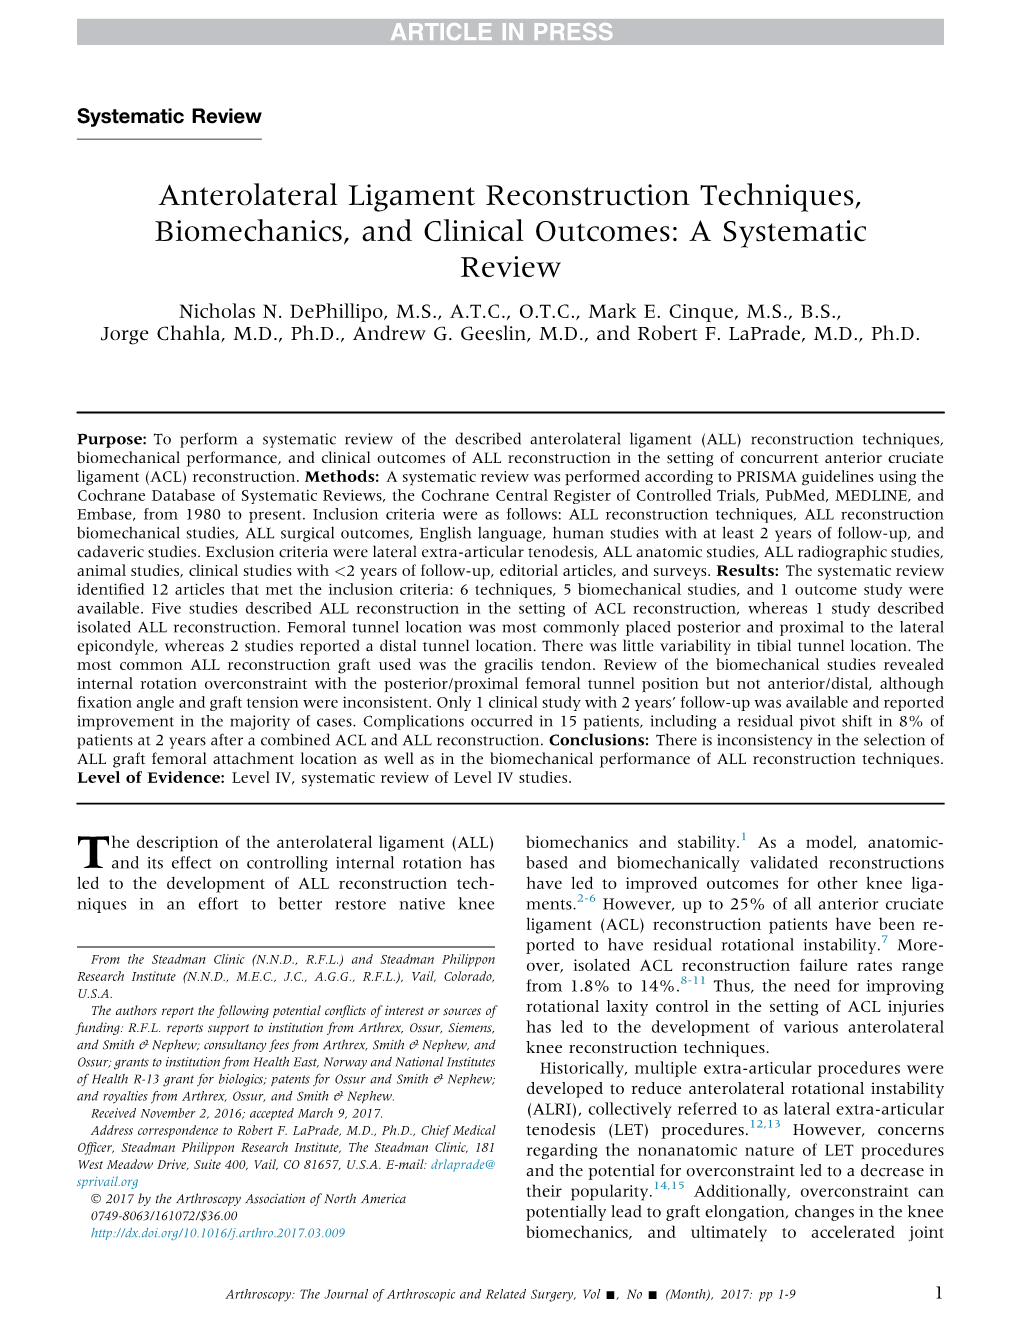 Anterolateral Ligament Reconstruction Techniques, Biomechanics, and Clinical Outcomes: a Systematic Review Nicholas N